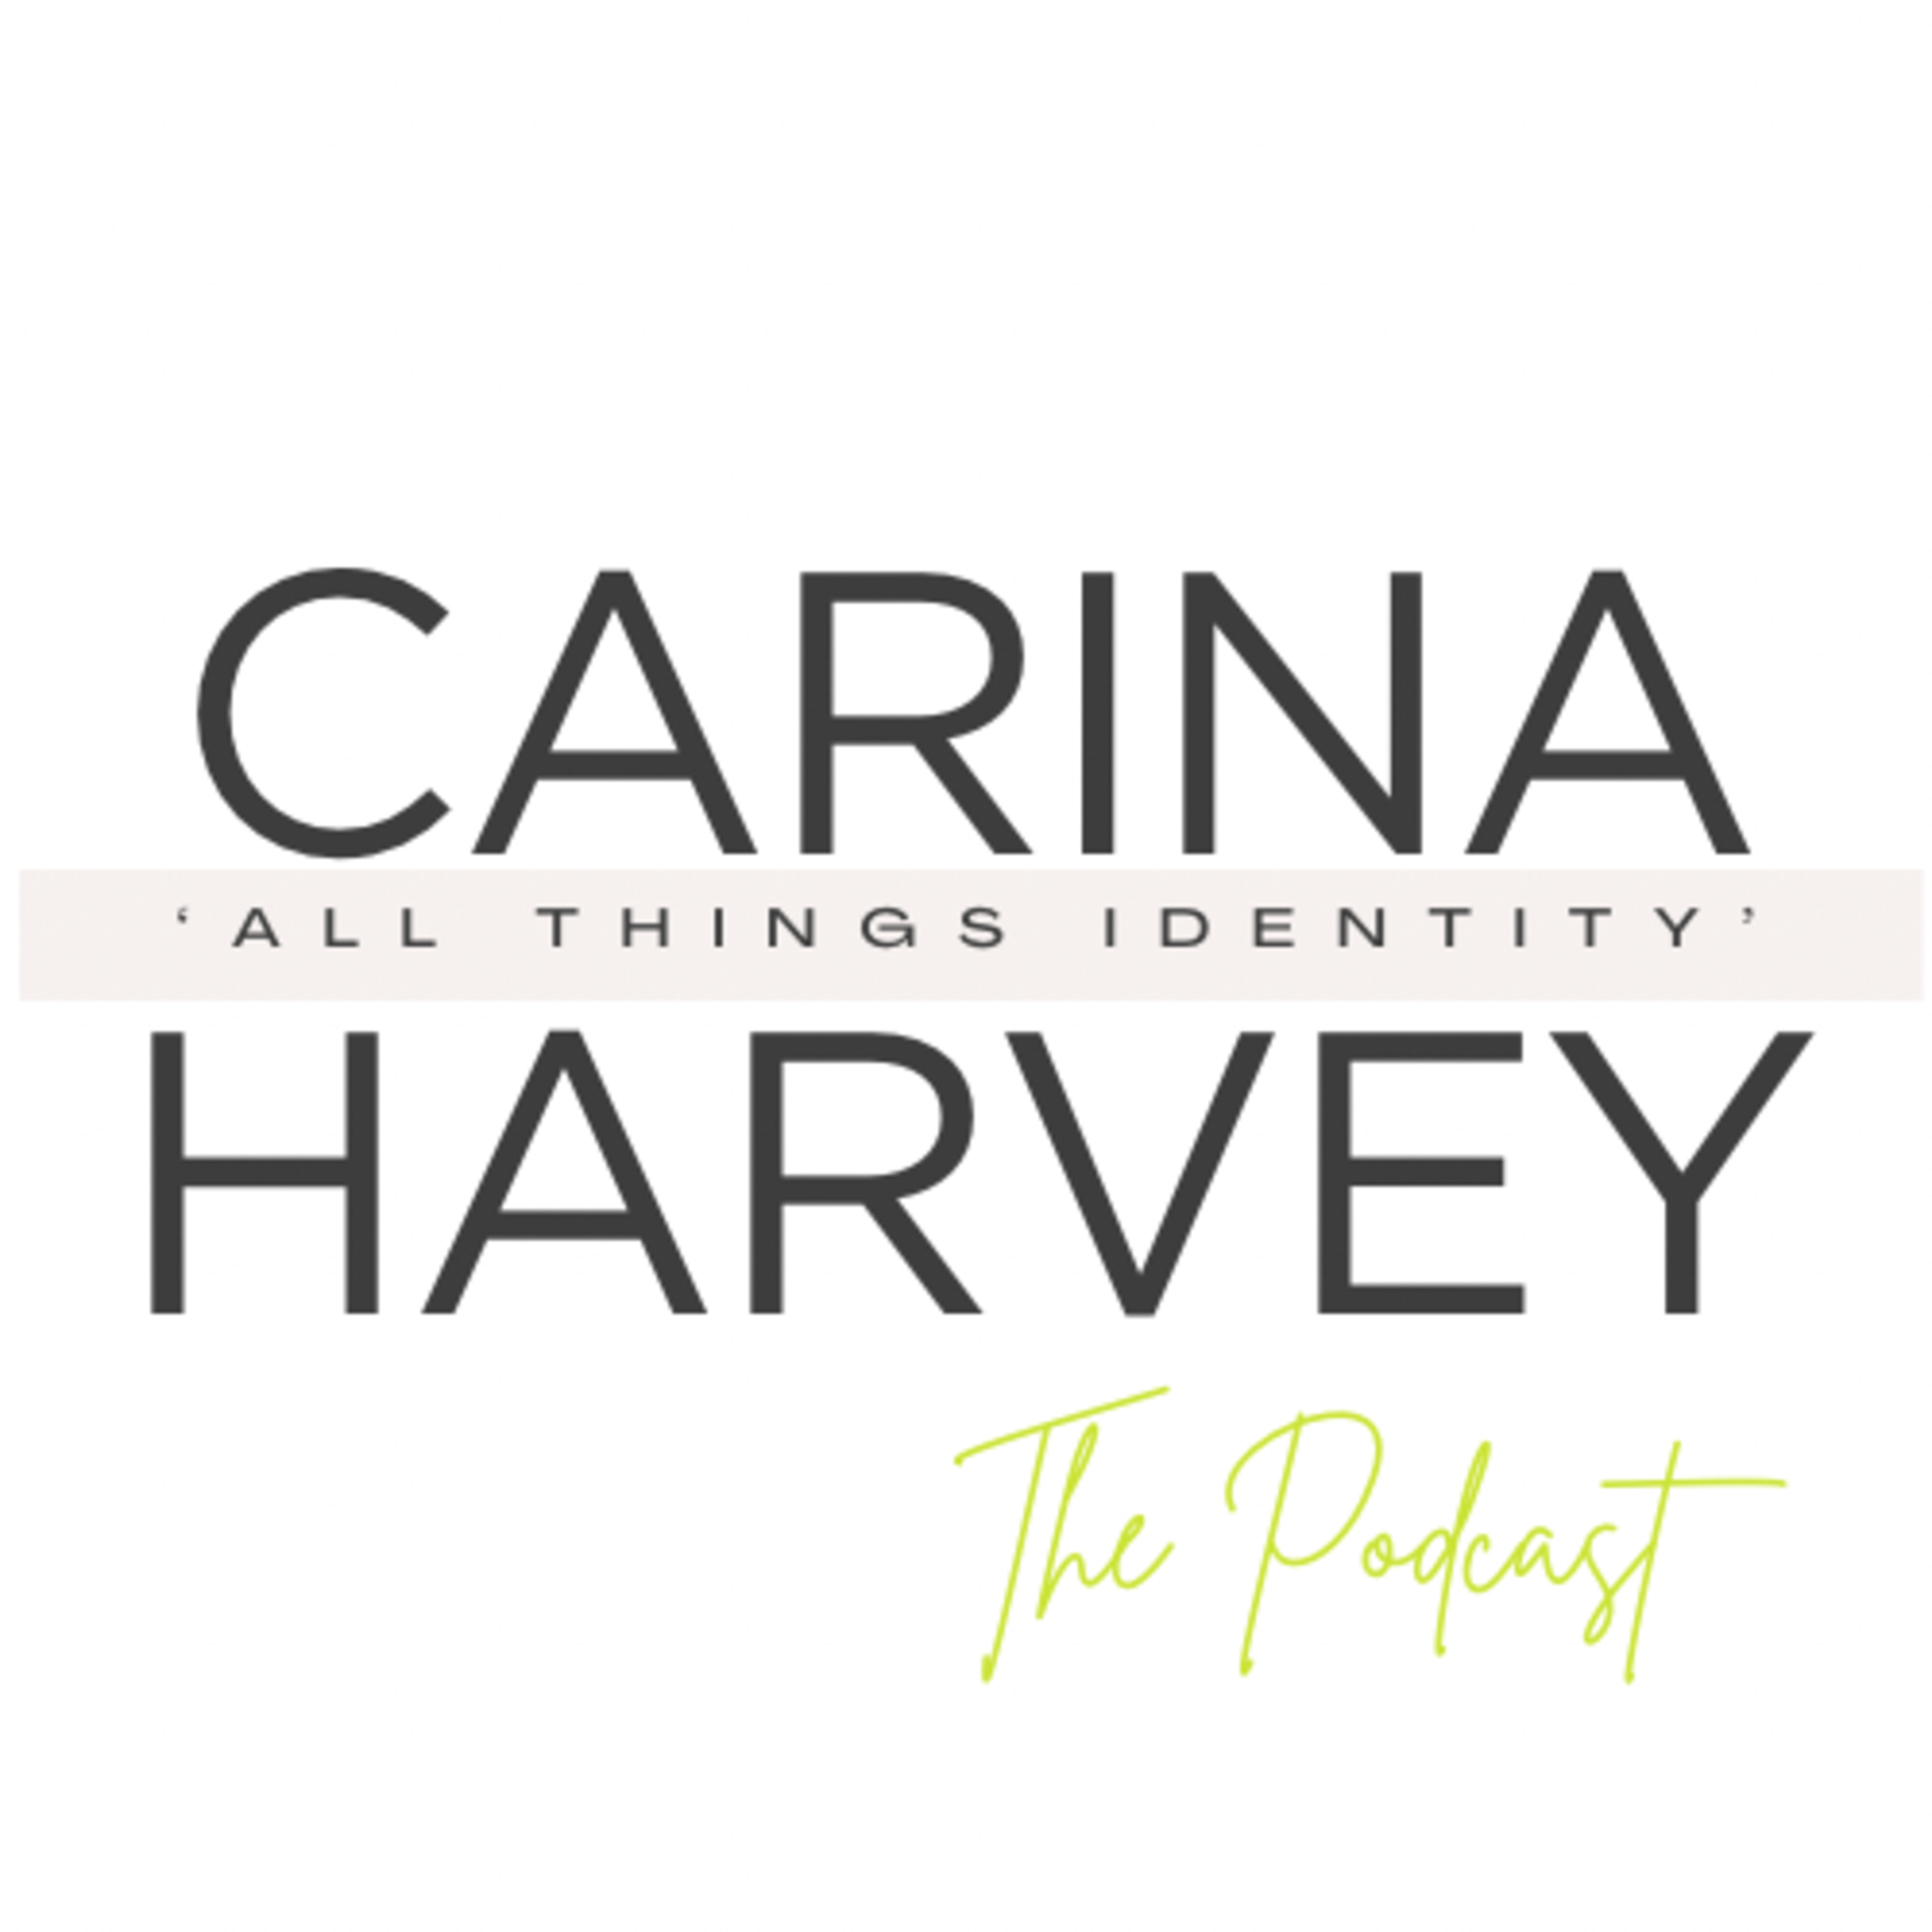 Episode 1 'All Things Identity': Setting The Scene